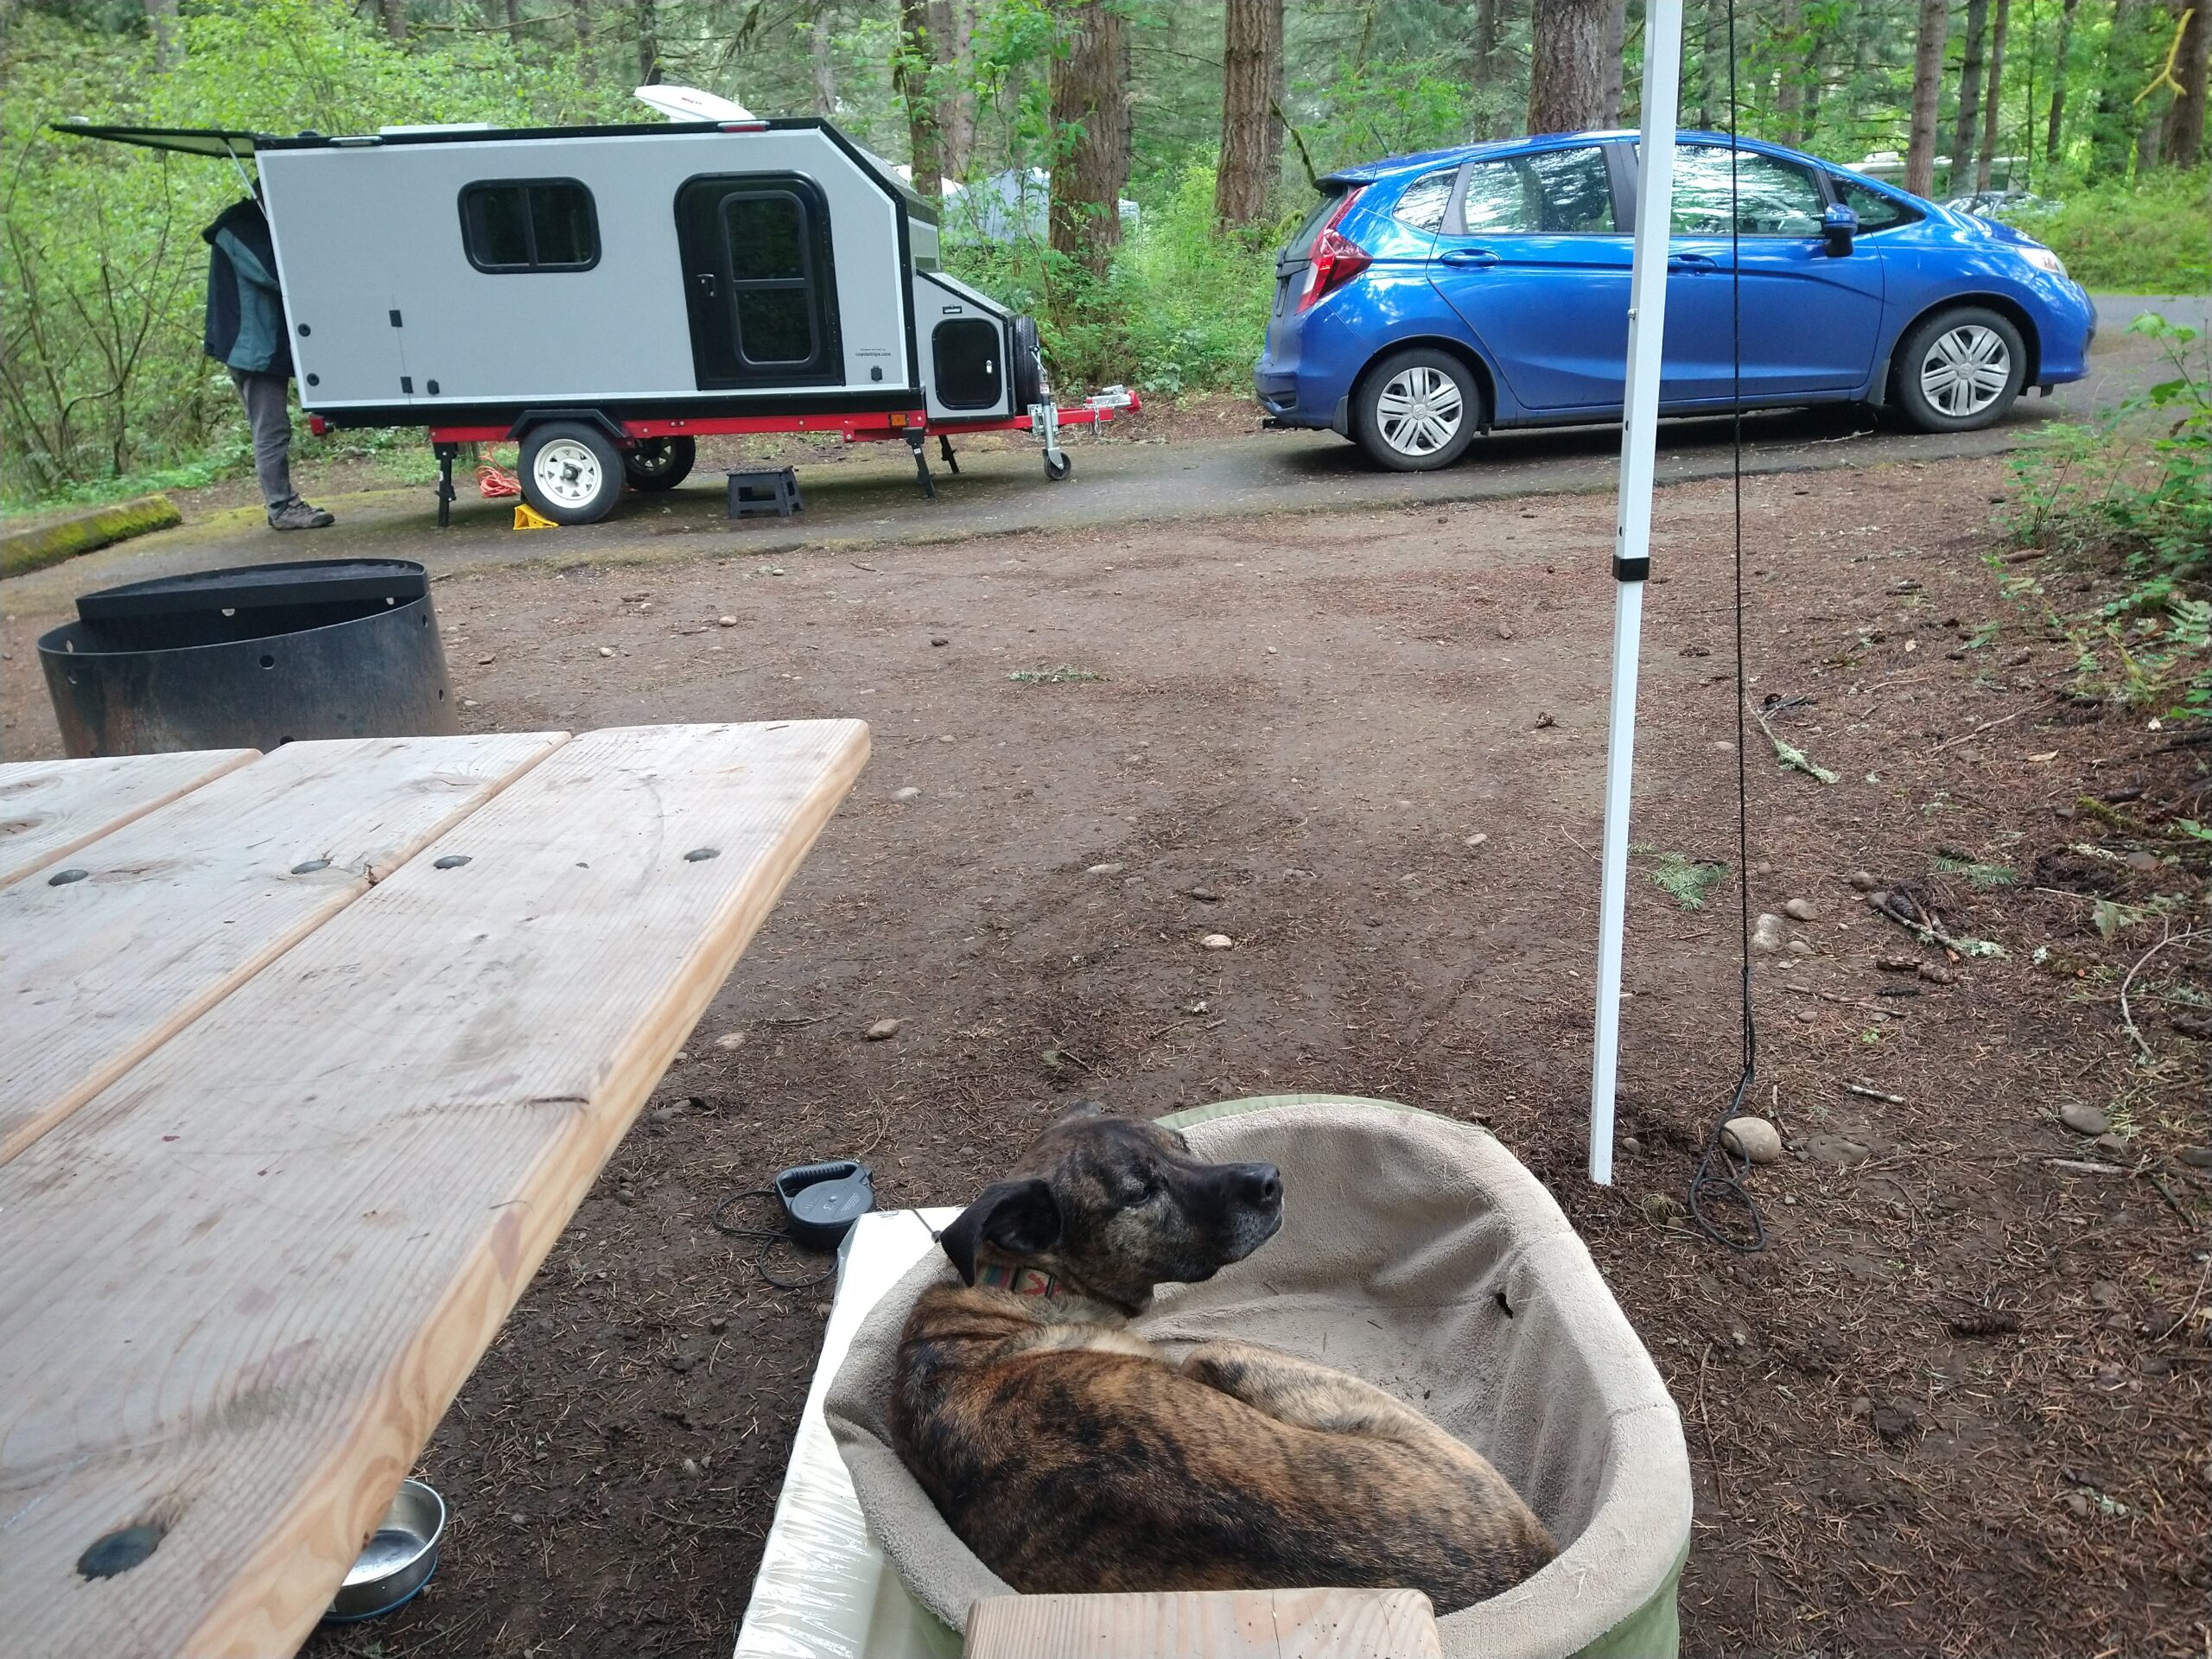 Weekend at Milo McIver State Park with the Square Drop Micro Camper